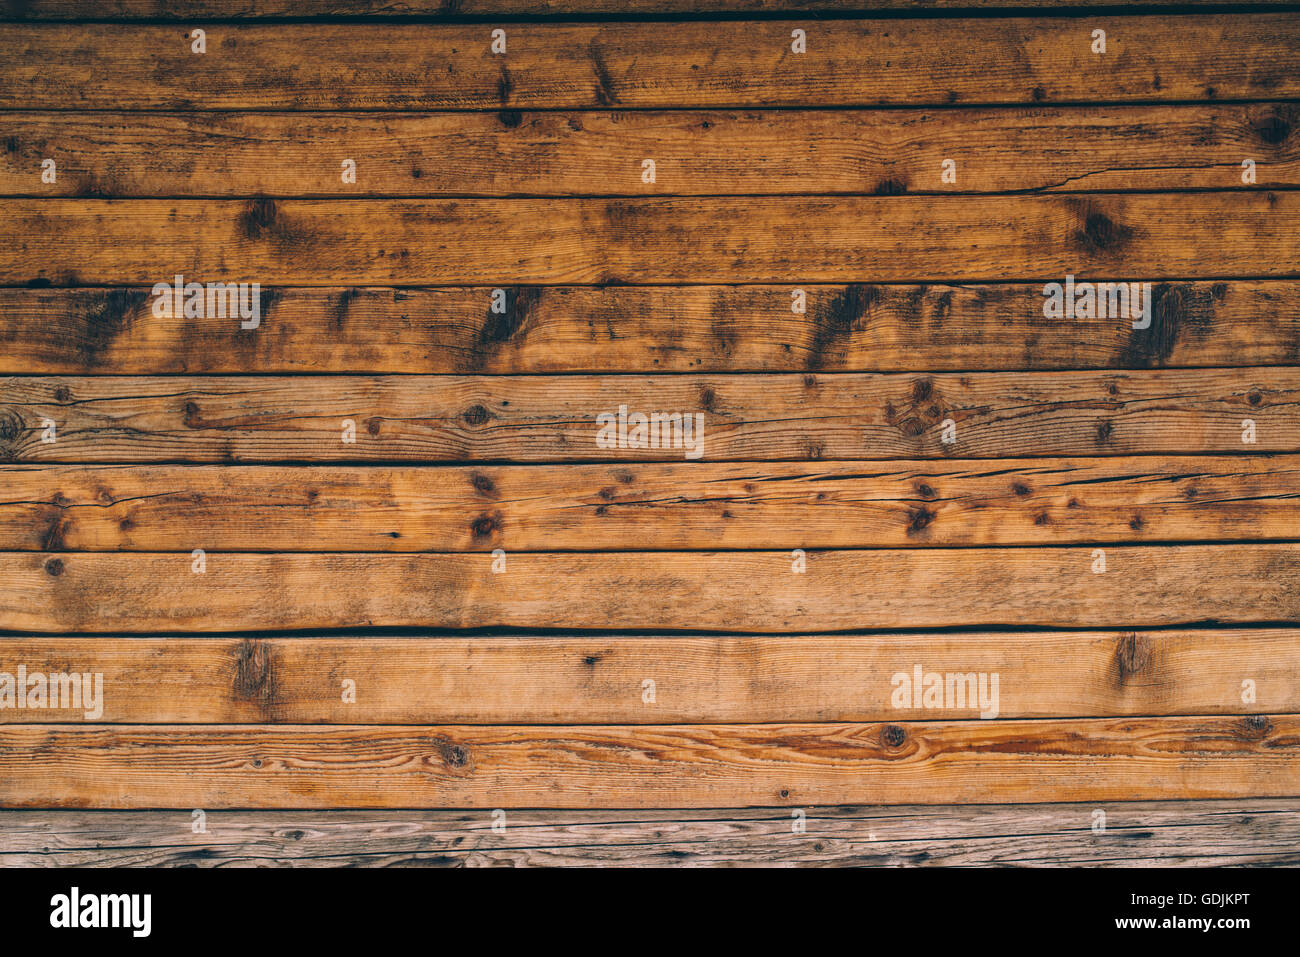 Rustic woden planks texture as natural background Stock Photo